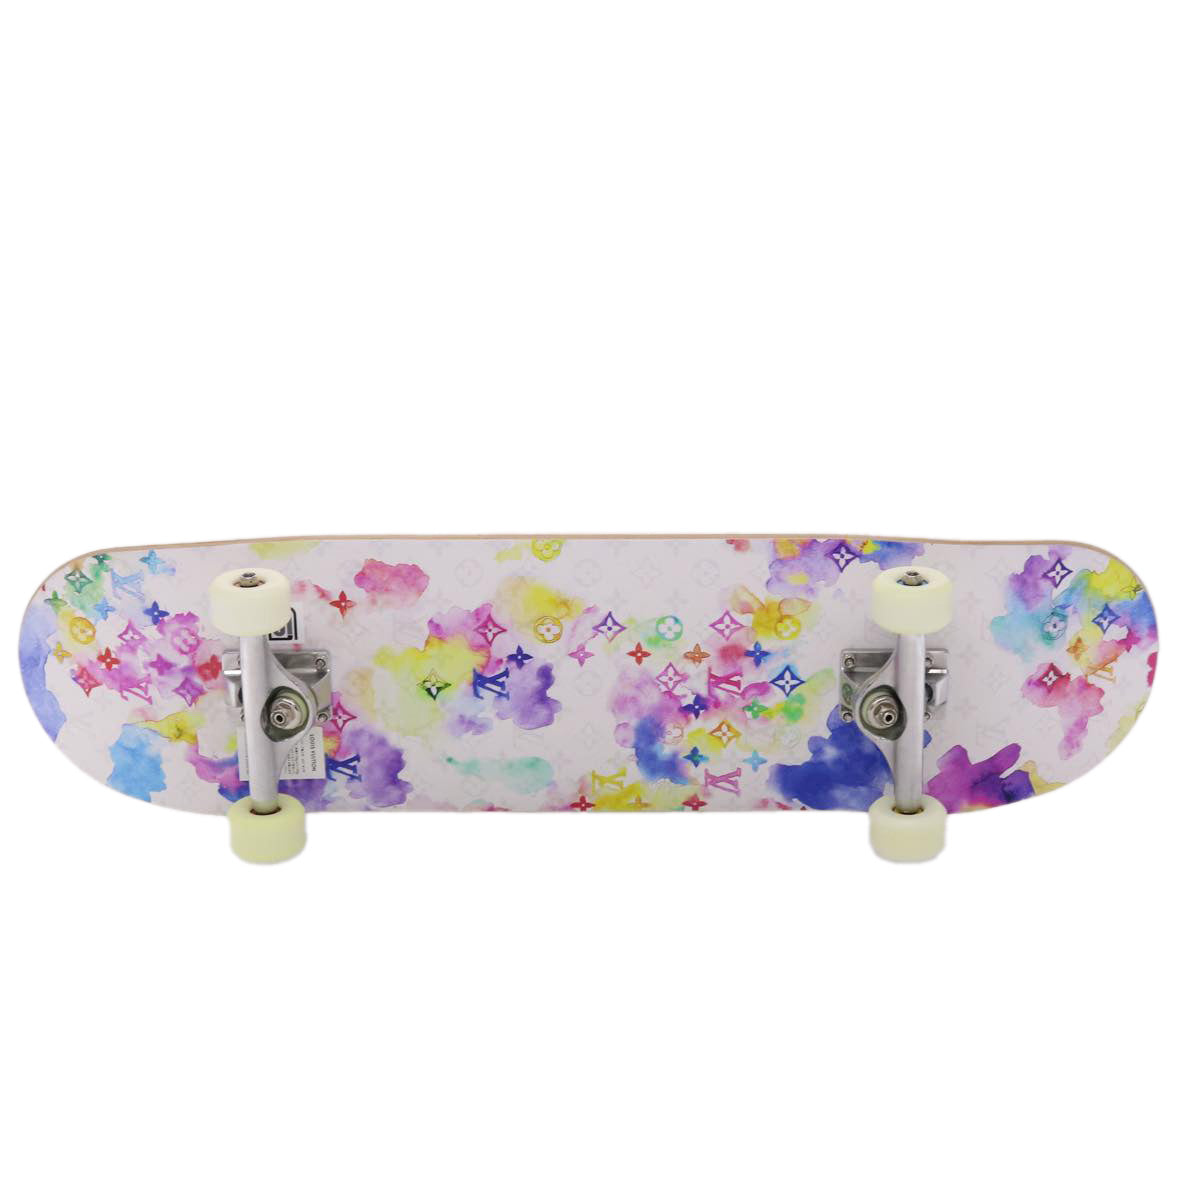 LOUIS VUITTON Monogram Water Color Skateboard Wood 22SS White GI0622 Auth 46805A